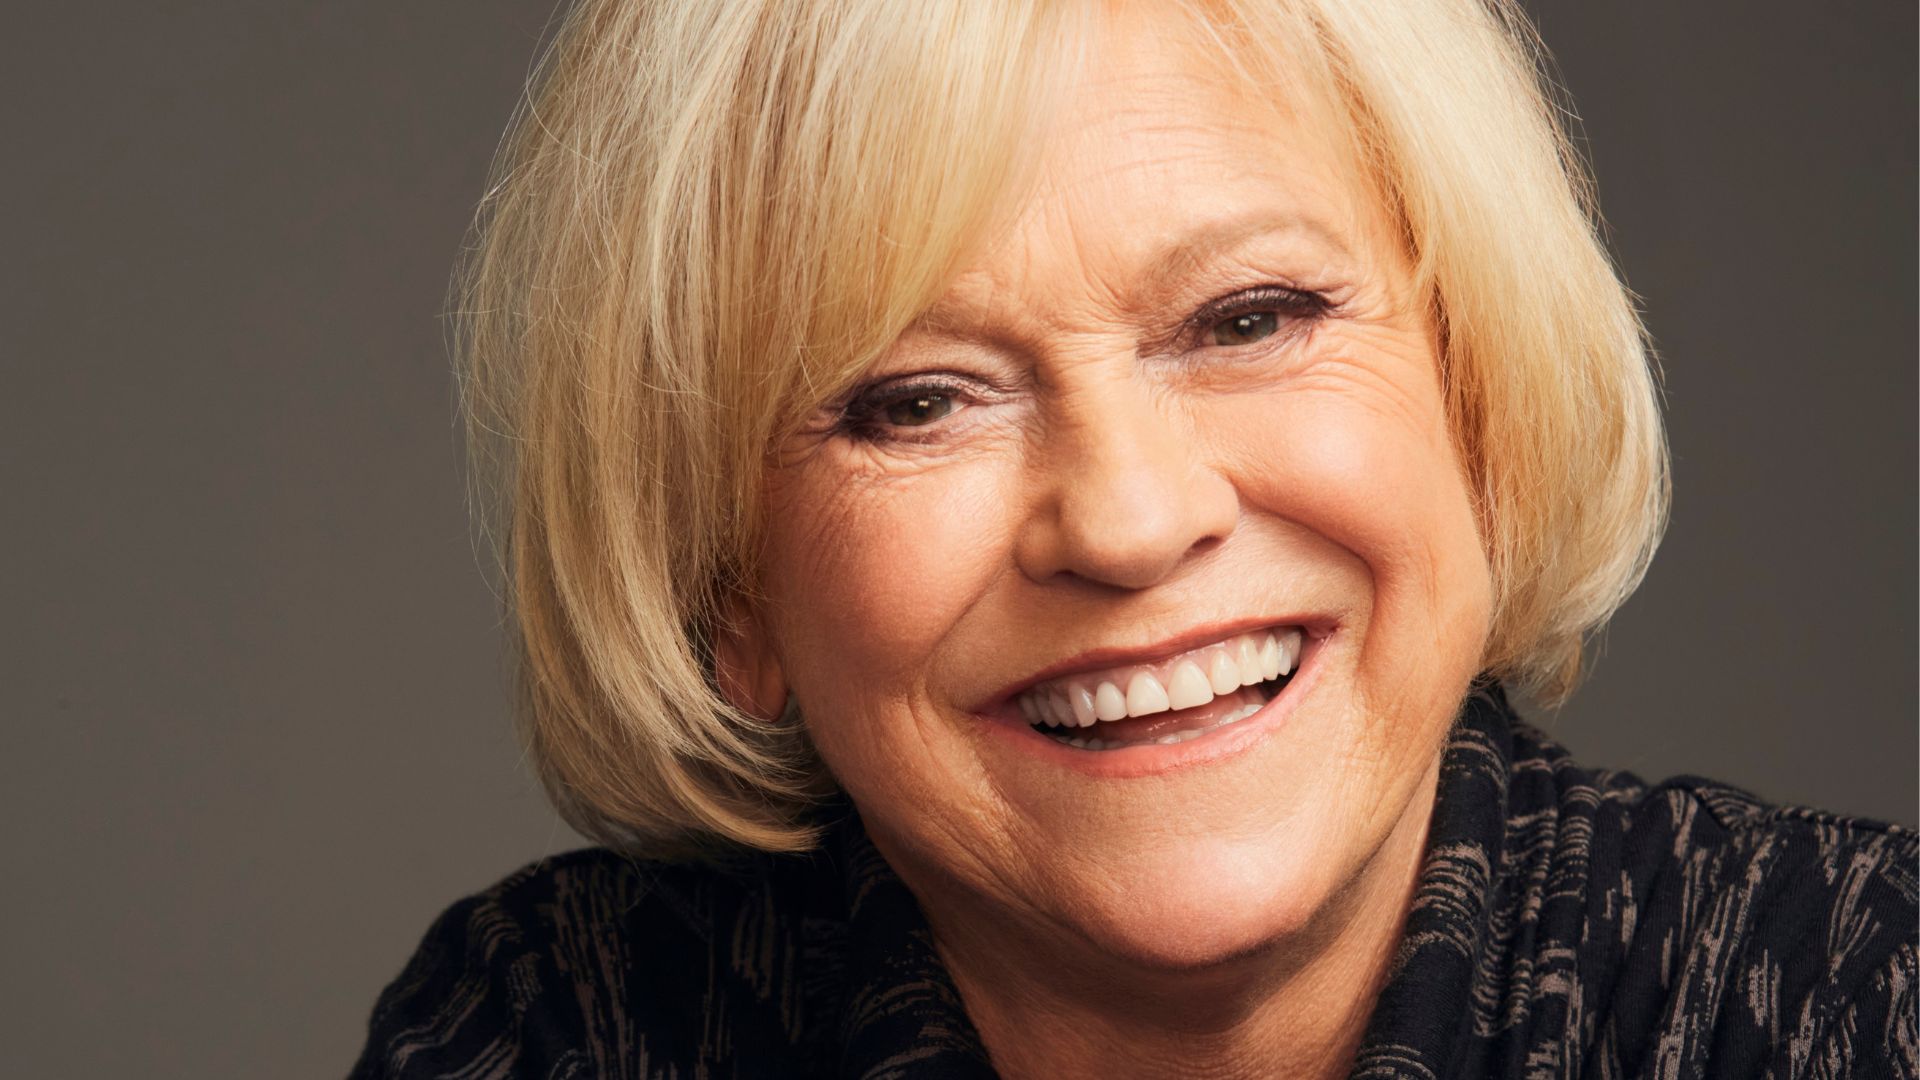 The Bookseller - Rights - Sue Barker's autobiography netted by Ebury ...